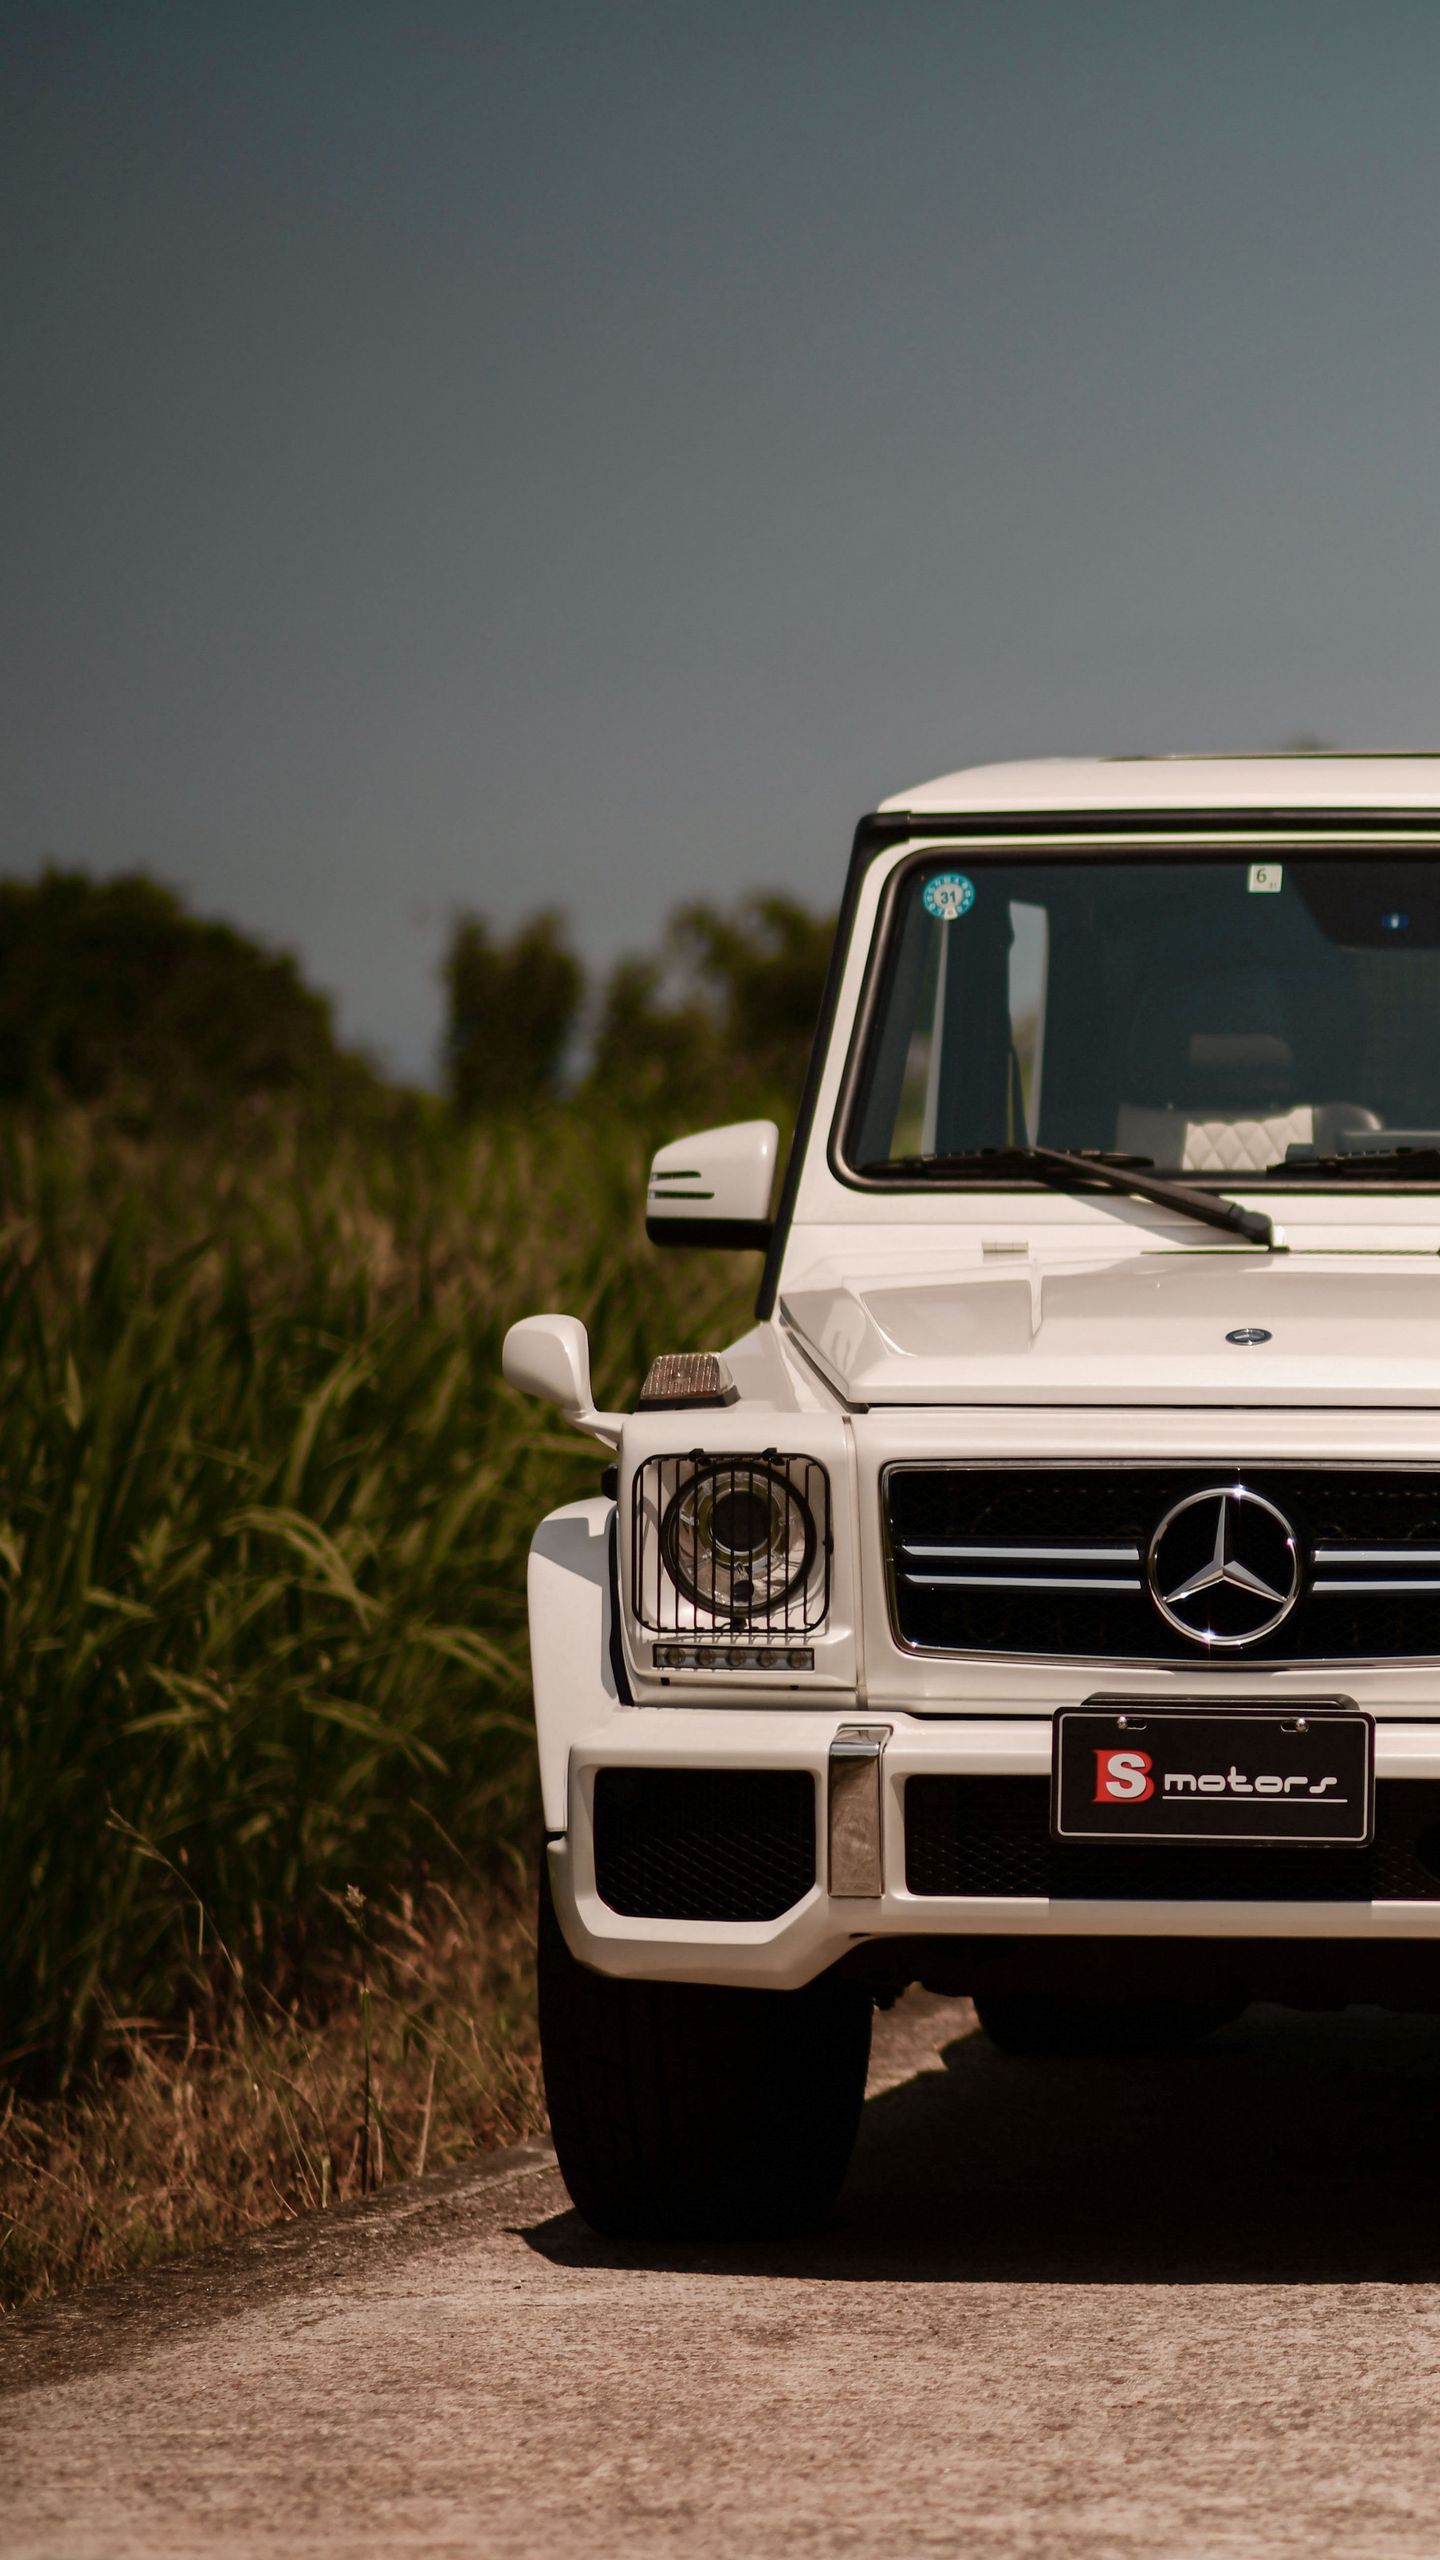 Download Wallpaper 1440x2560 Mercedes Benz G63 Amg, Mercedes, Car, Suv, White, Front View Qhd Samsung Galaxy S S Edge, Note, Lg G4 HD Background